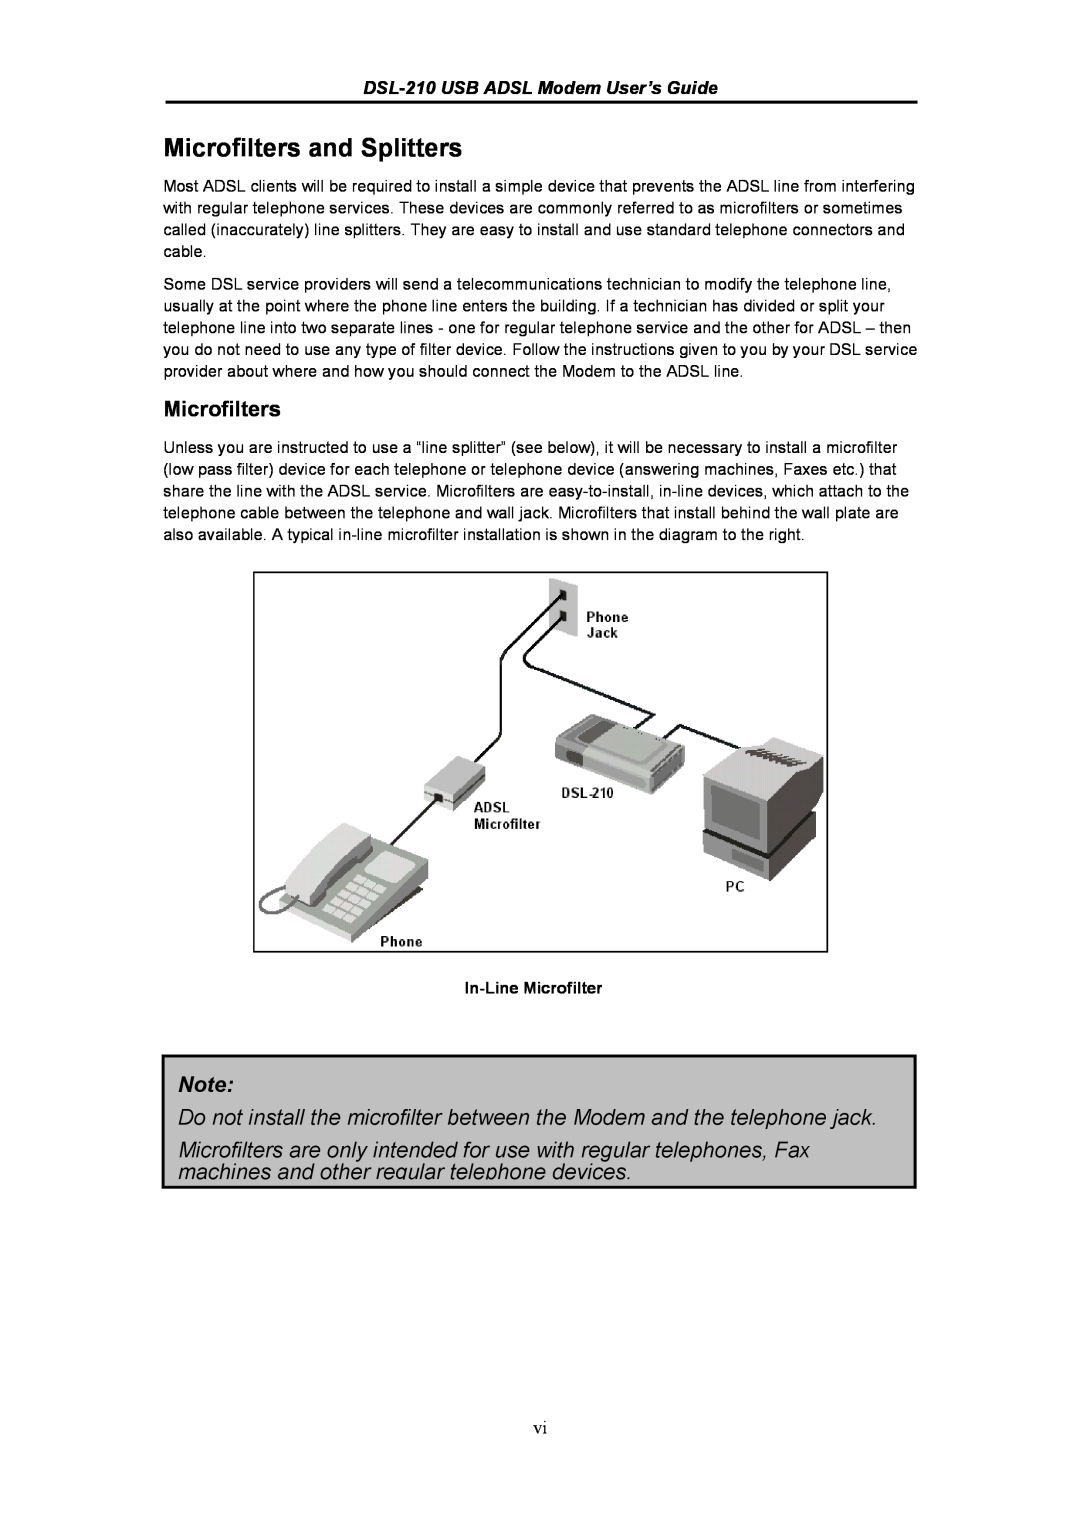 D-Link DSL-210 manual Microfilters and Splitters 